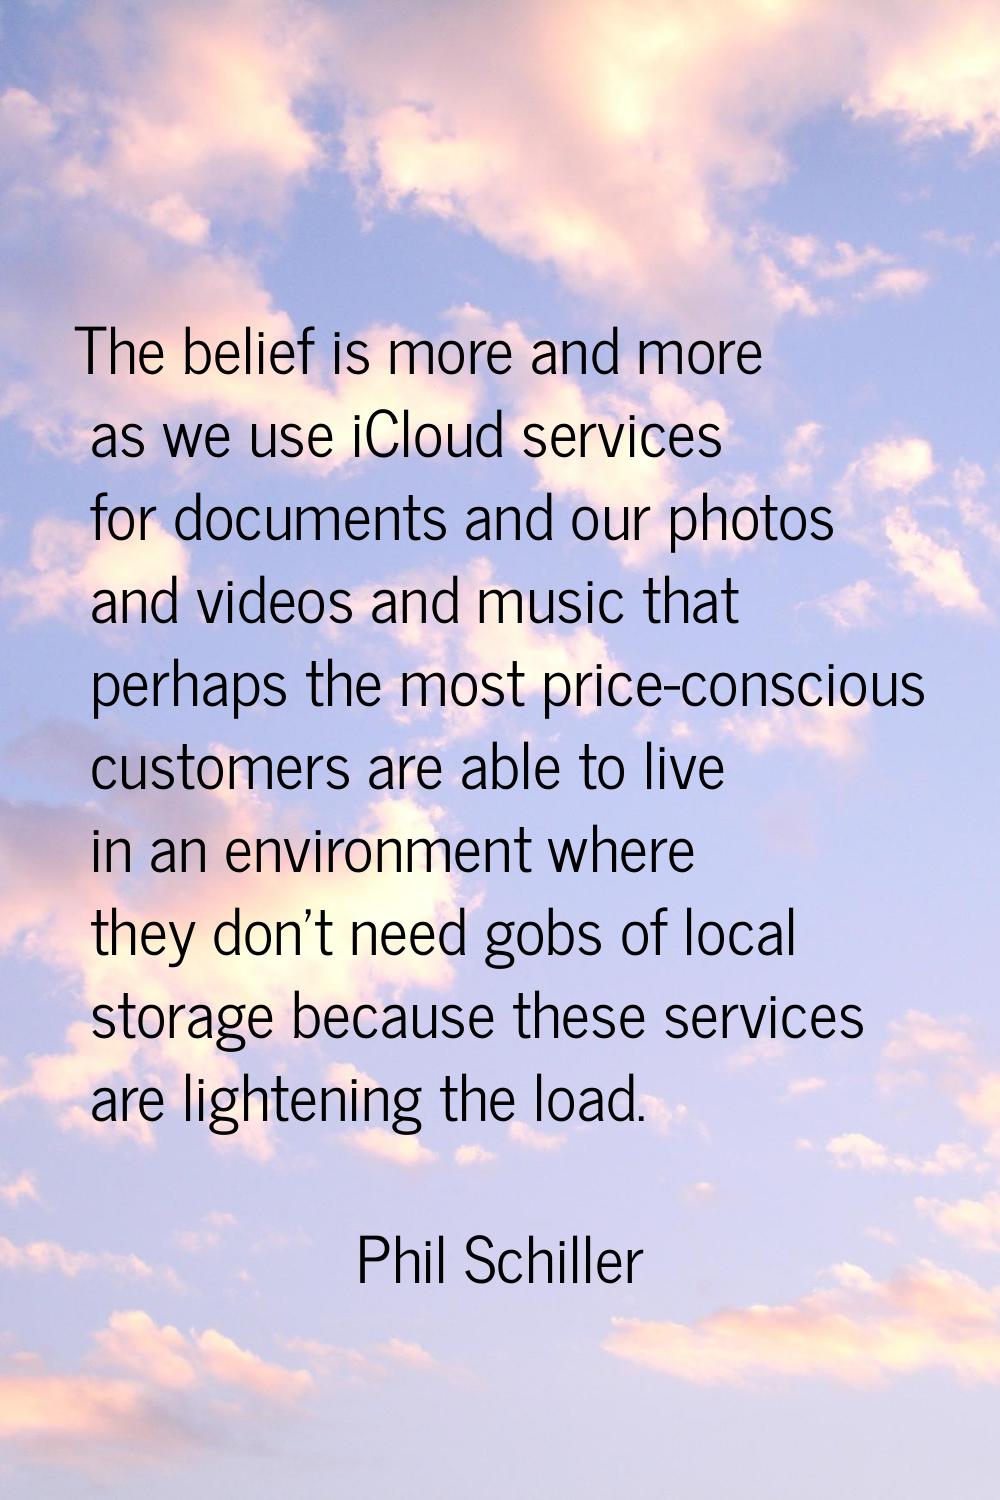 The belief is more and more as we use iCloud services for documents and our photos and videos and m